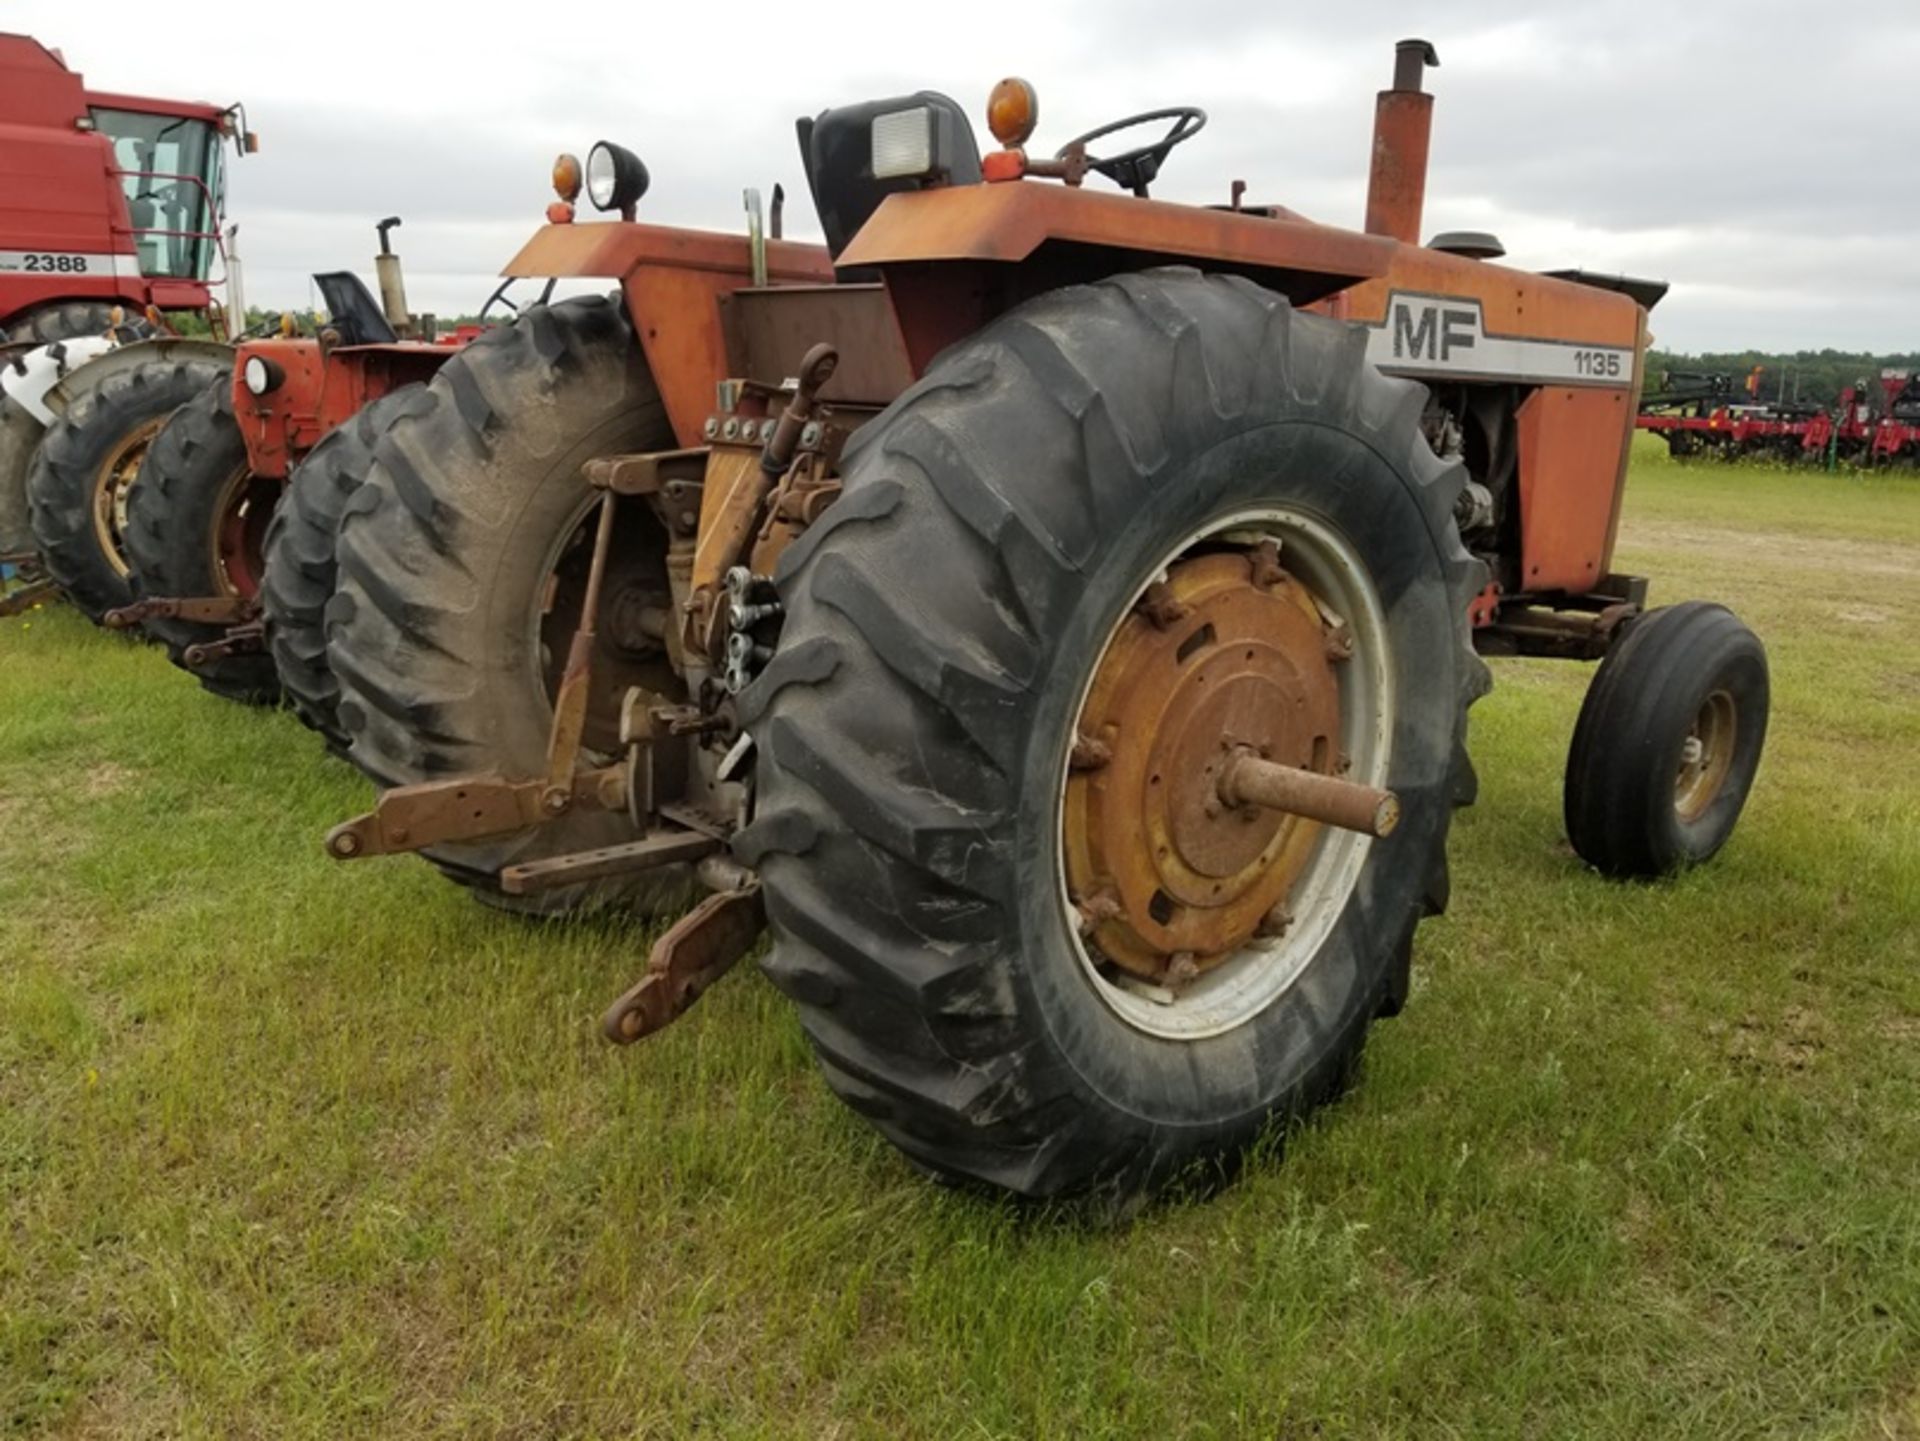 MF 1135 tractor - Image 3 of 5